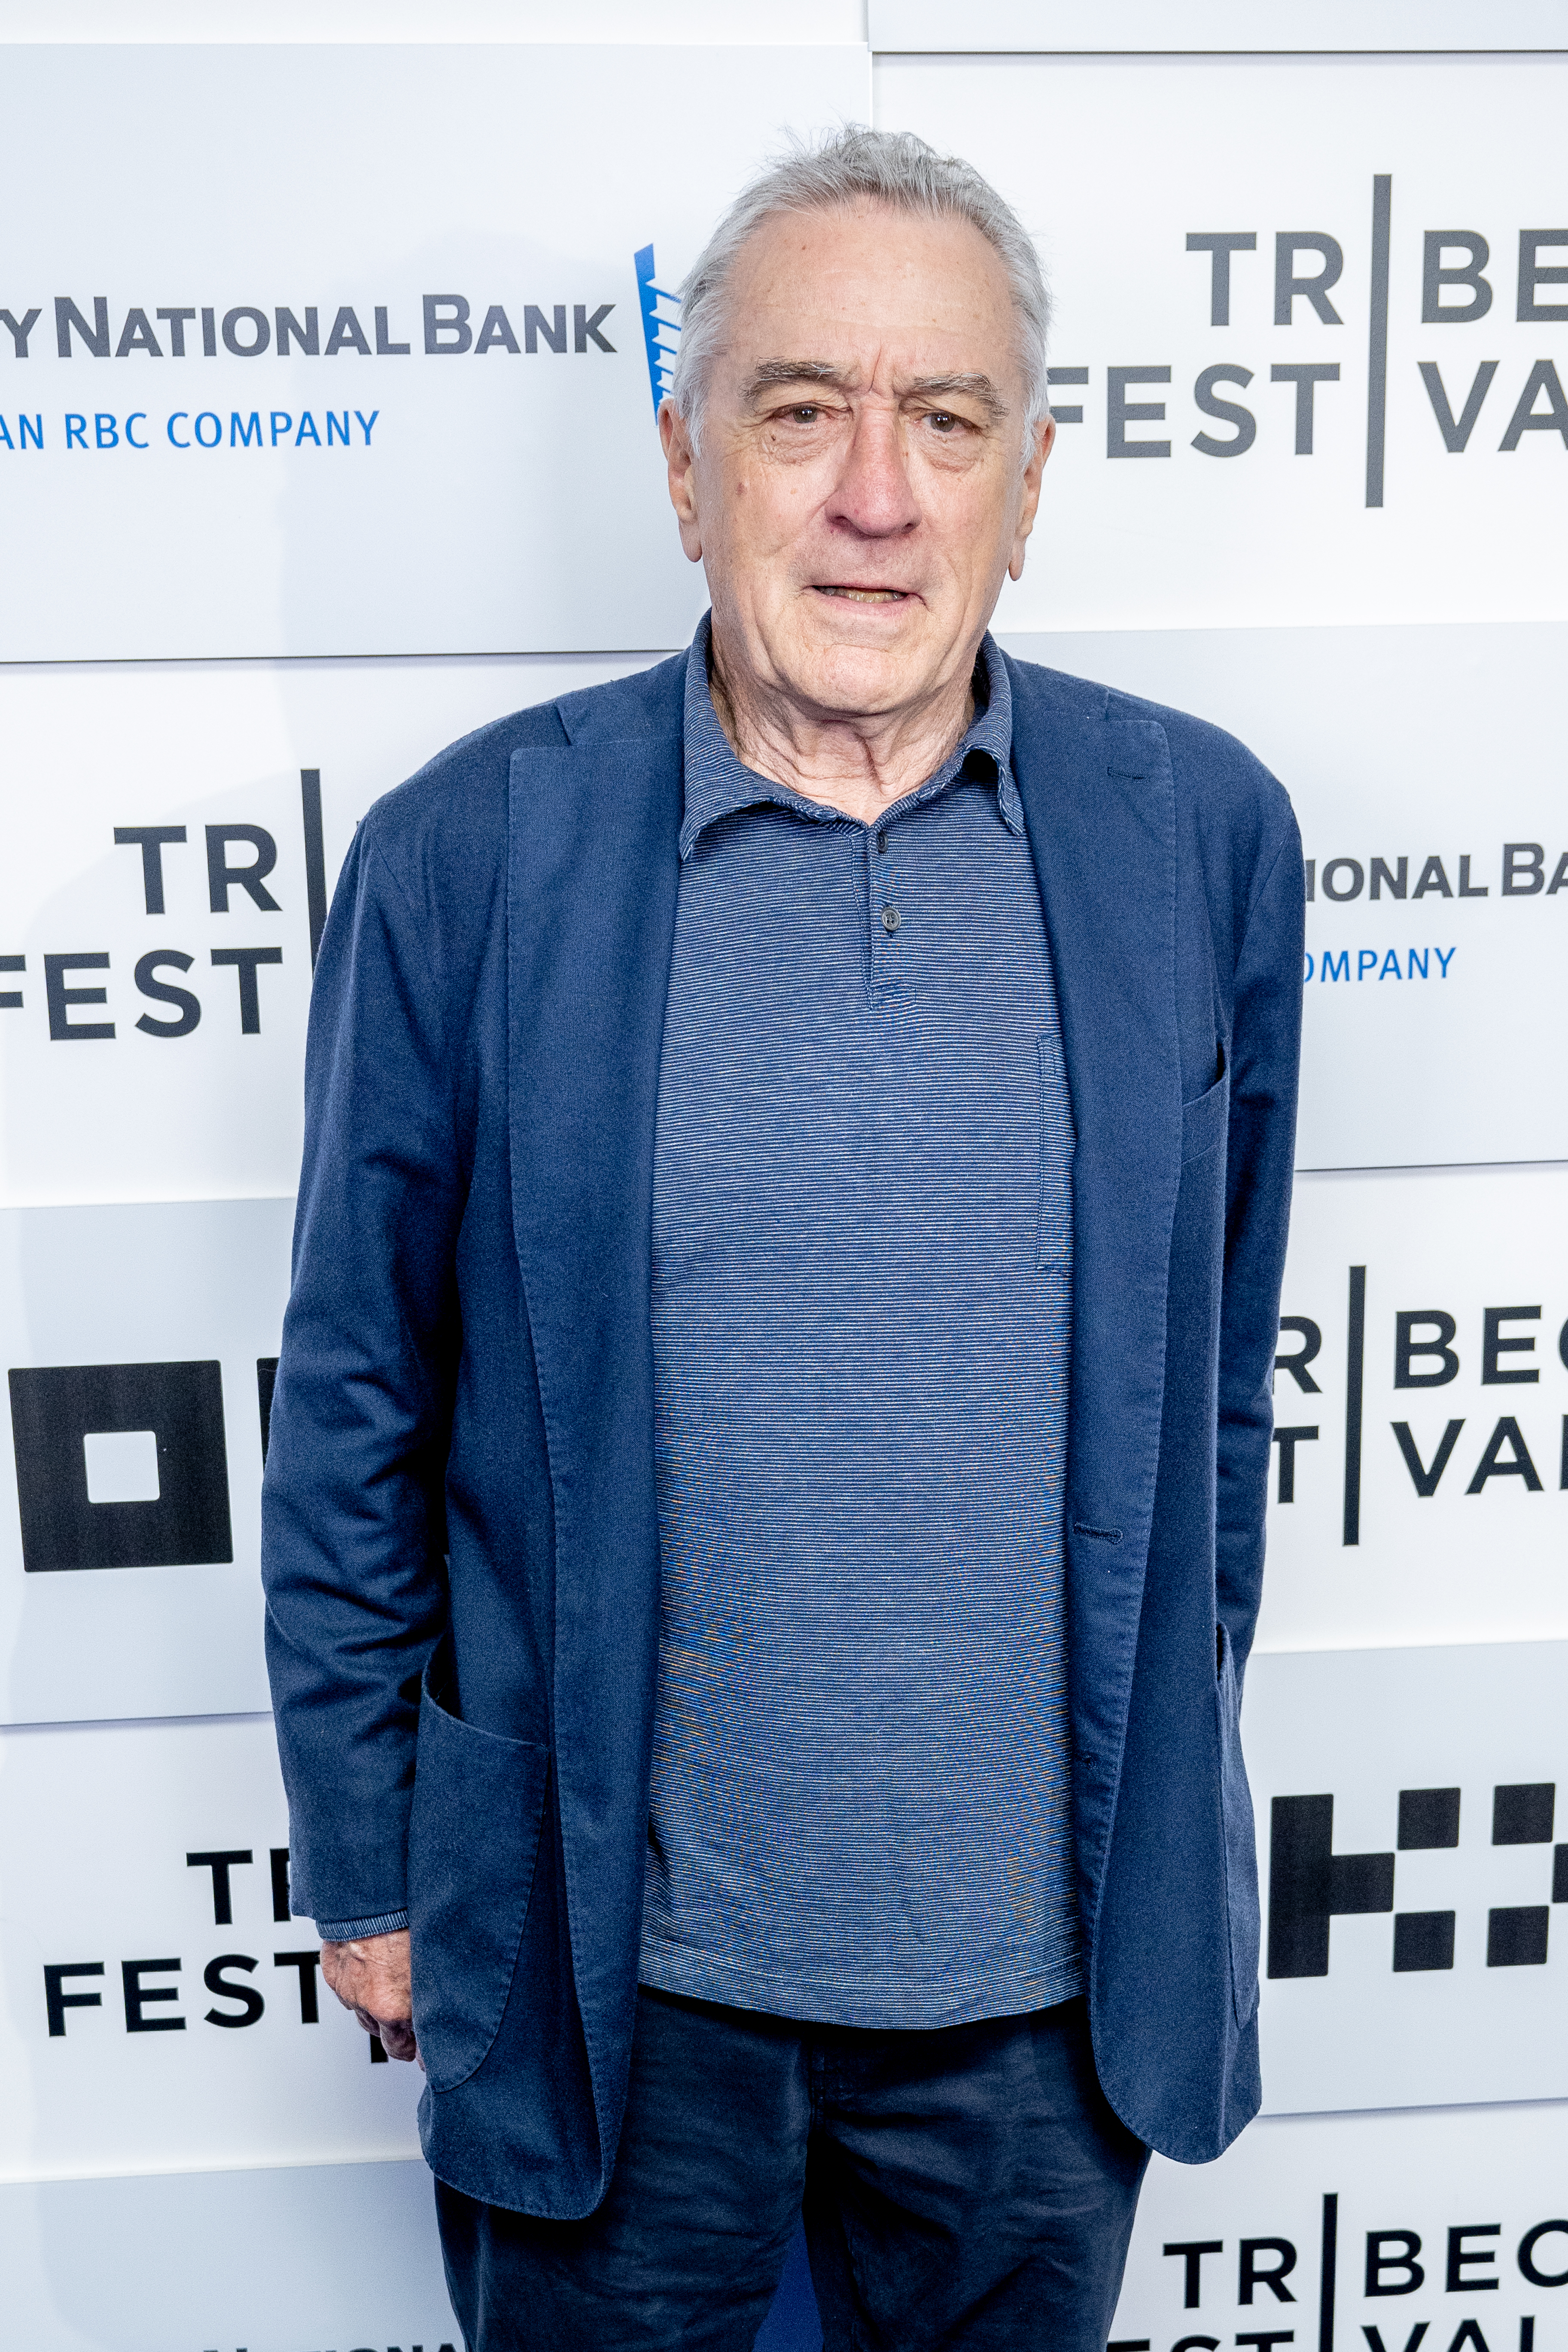 Robert De Niro at the screening of "A Bronx Tale" during the Tribeca Festival on June 17, 2023, in New York City. | Source: Getty Images